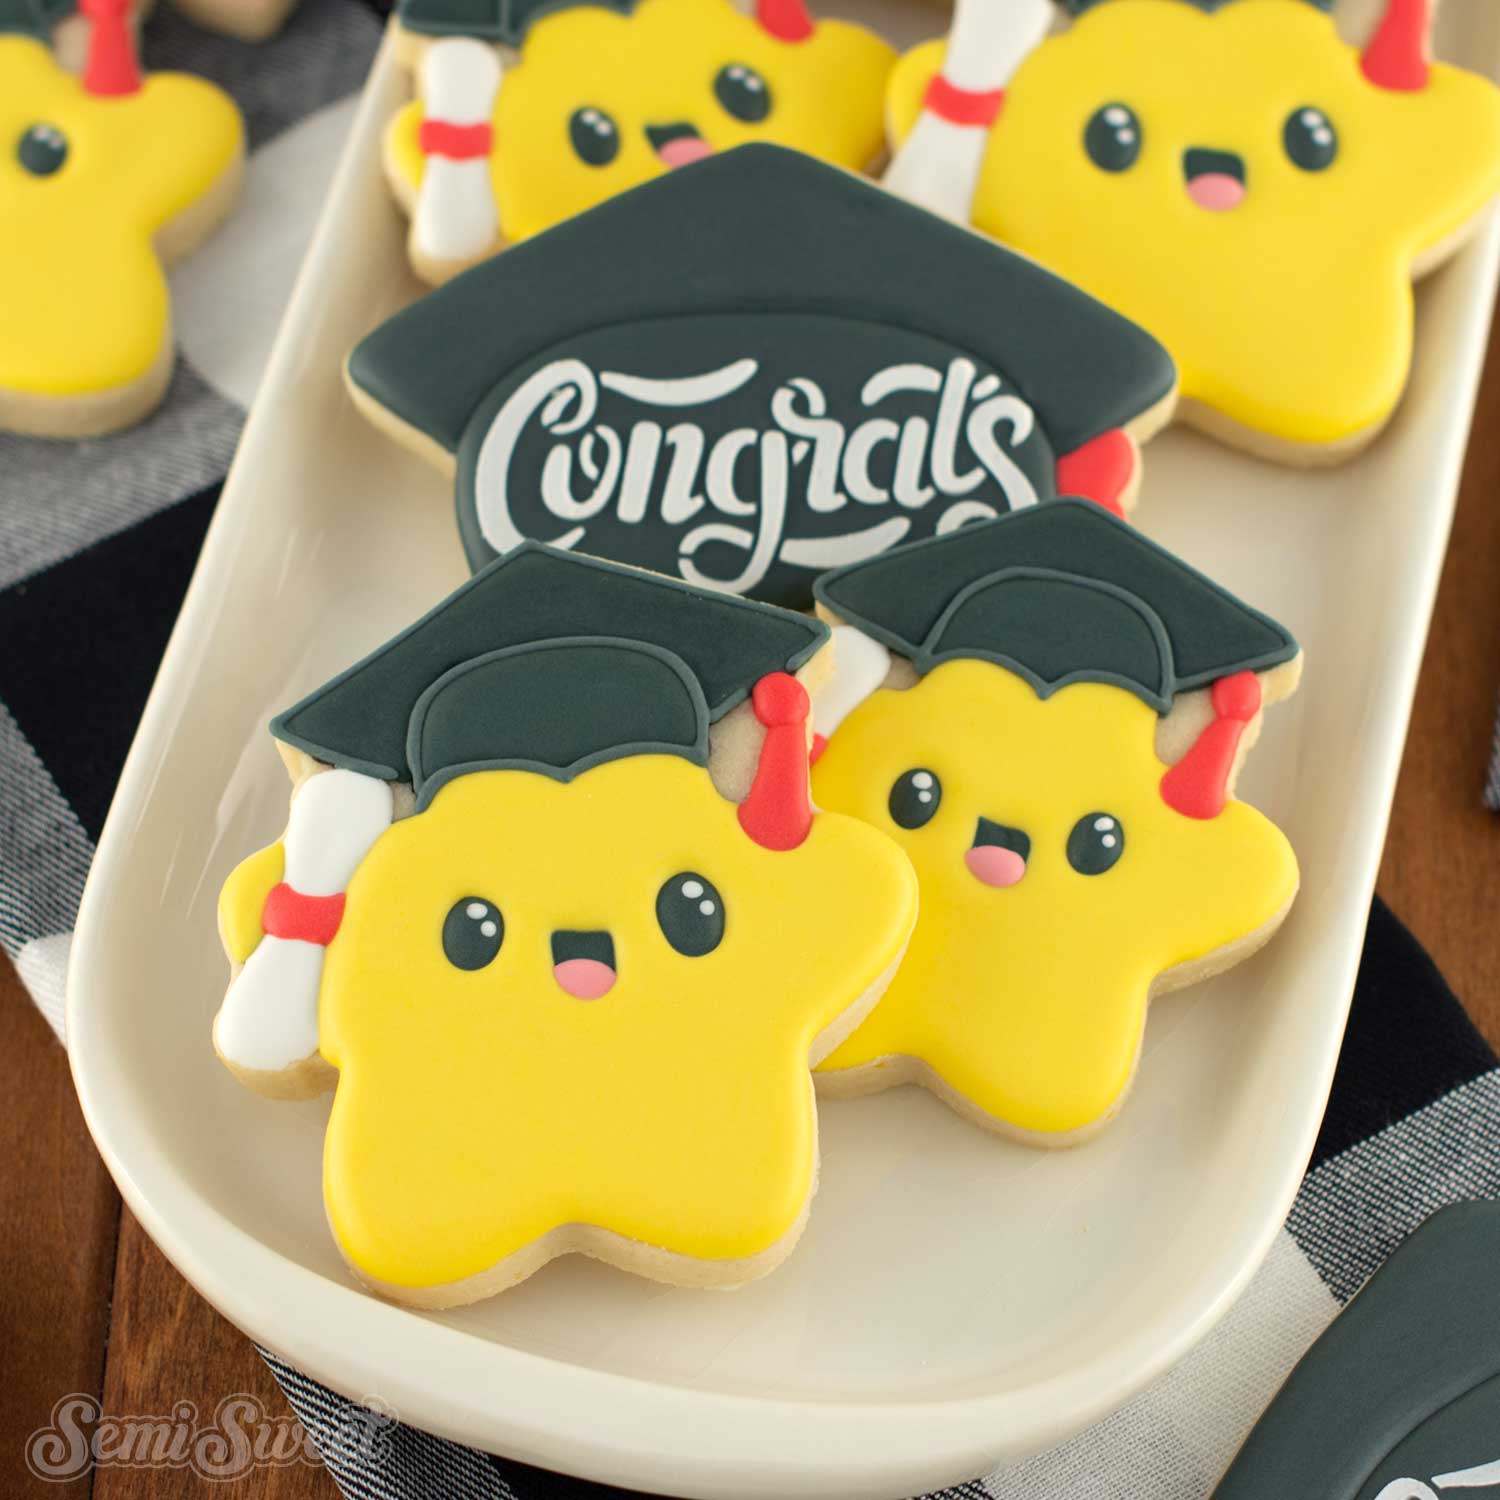 https://cdn.shopify.com/s/files/1/2355/4701/products/graduation_star_cookie_square.jpg?v=1681644509